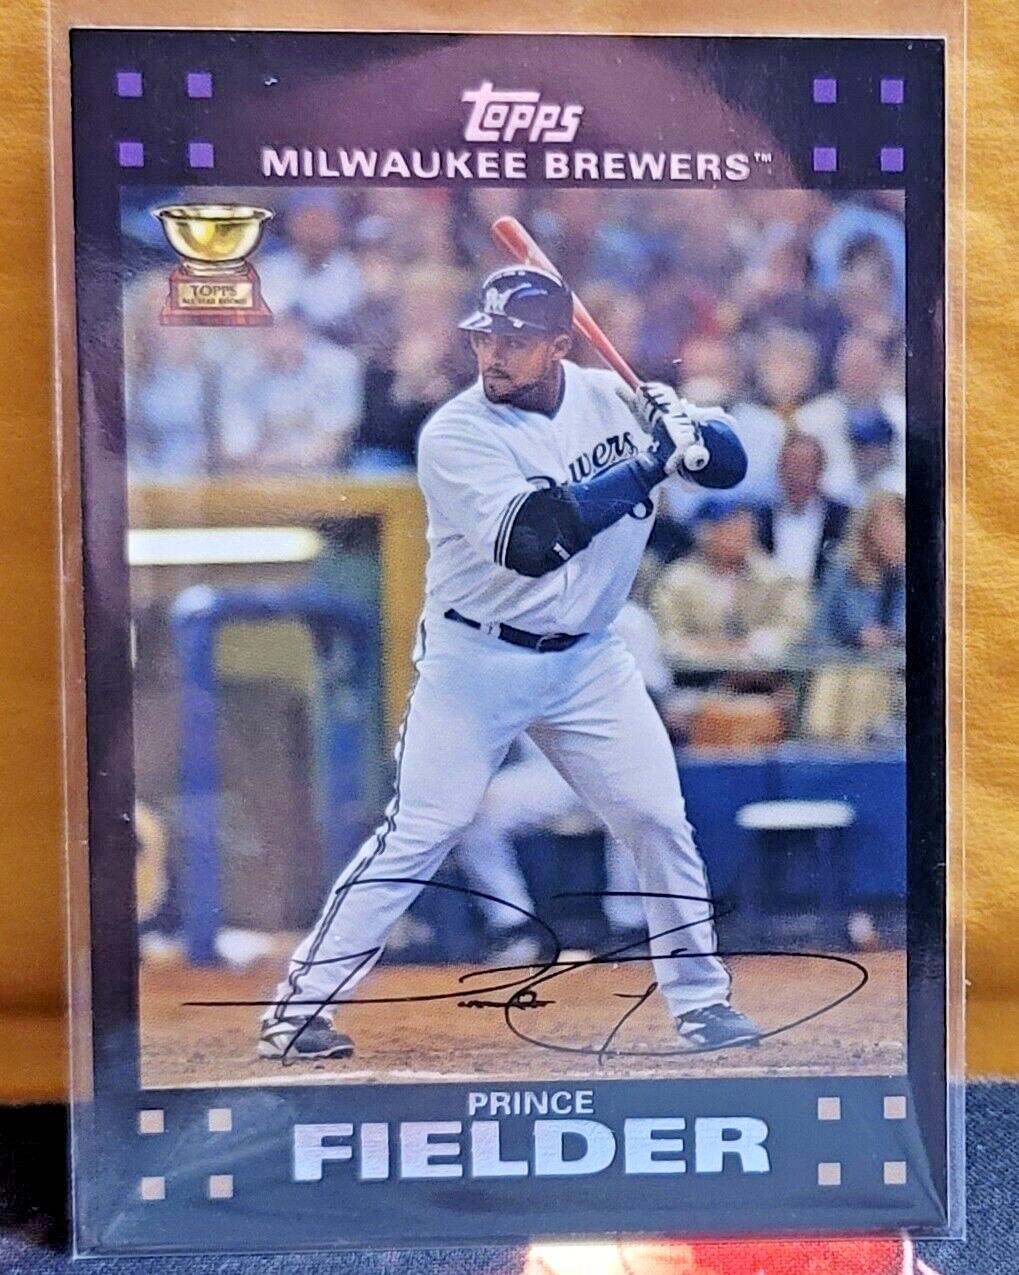 Prince Fielder – 2007 Topps Series One (Gold Cup) - #139